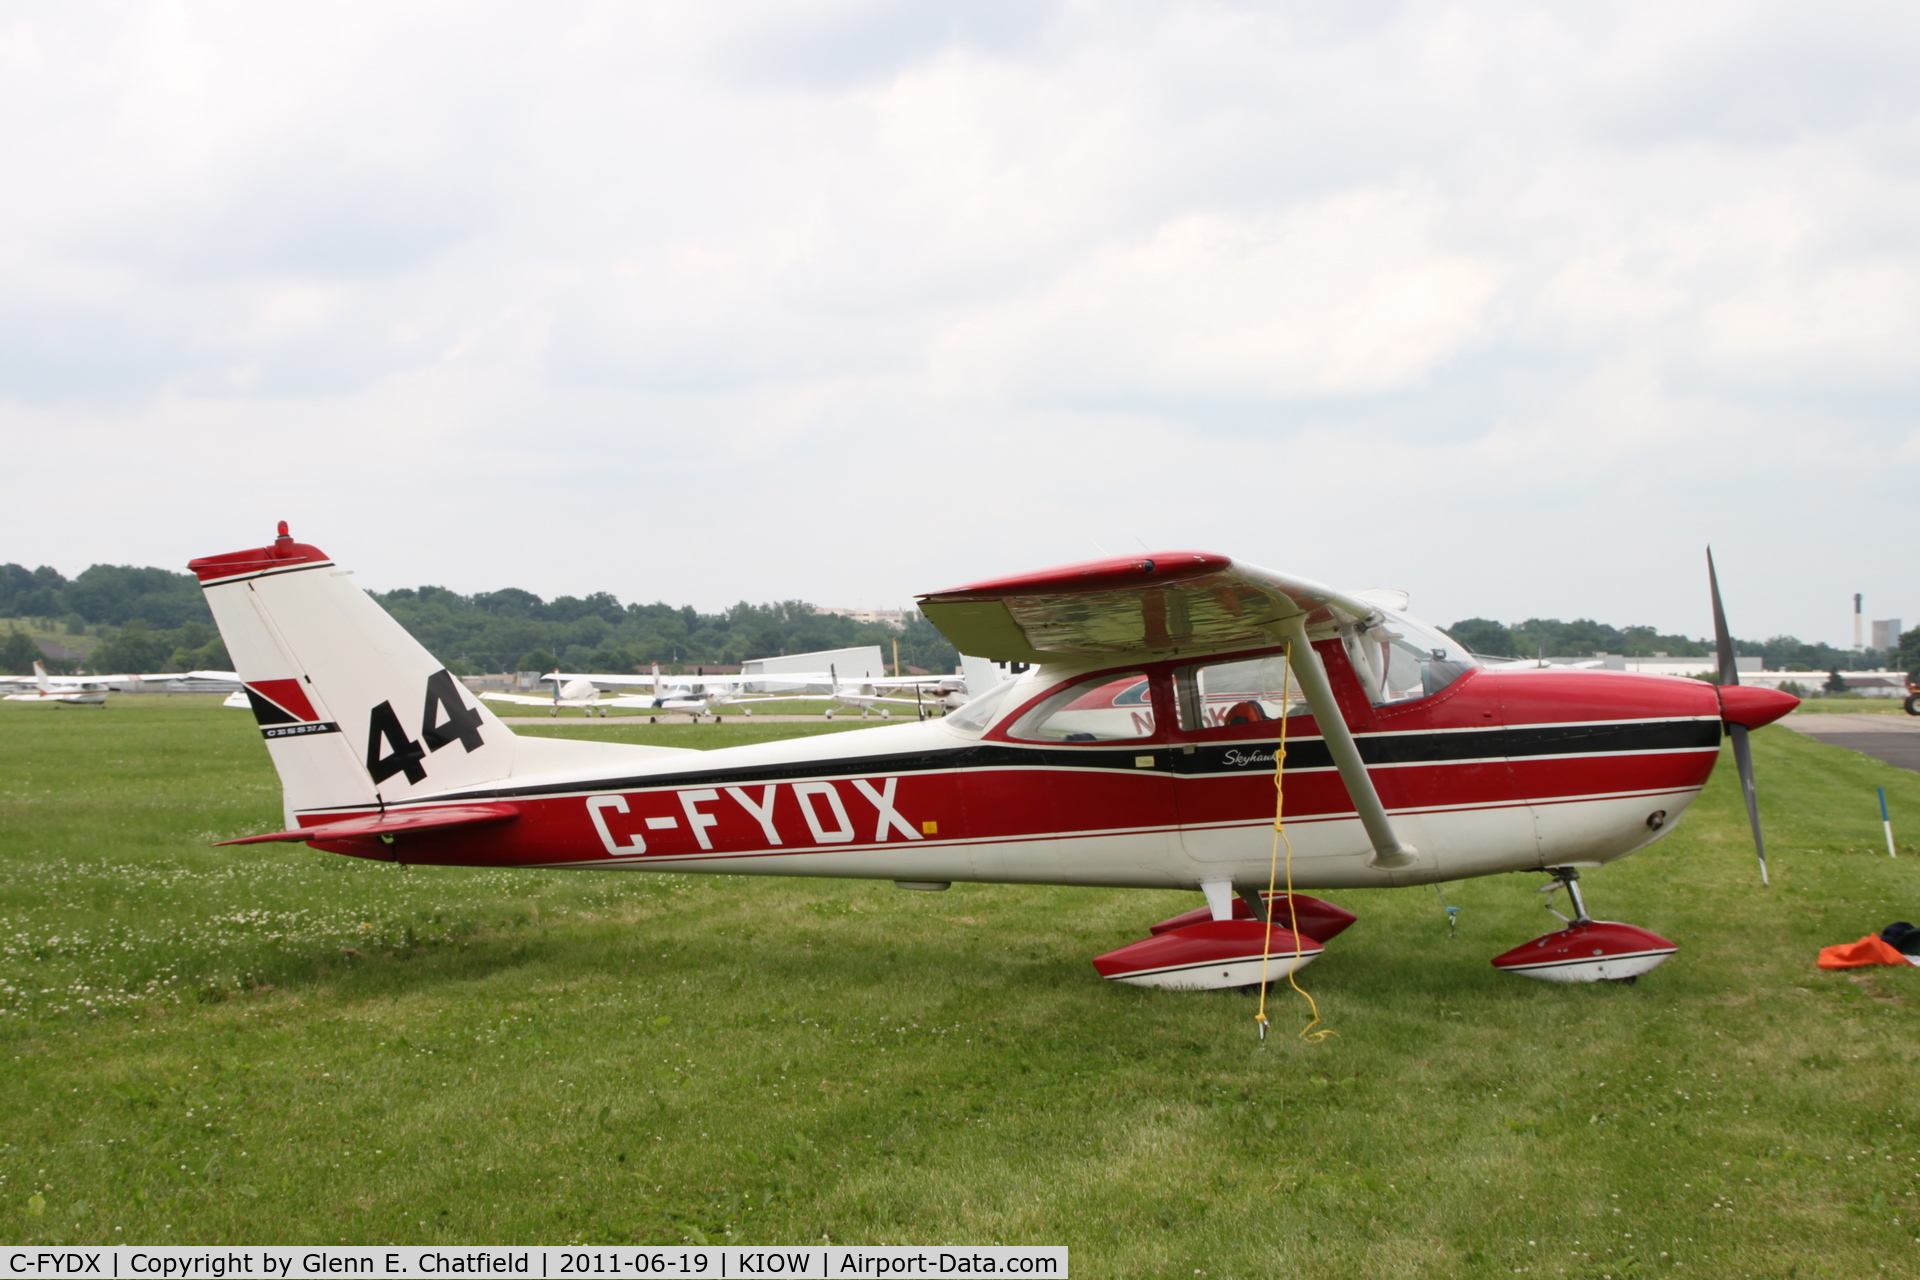 C-FYDX, 1965 Cessna 172F C/N 17252880, In town for the 99s' Air Race Classic. Iowa City starting point dropped due to weather.